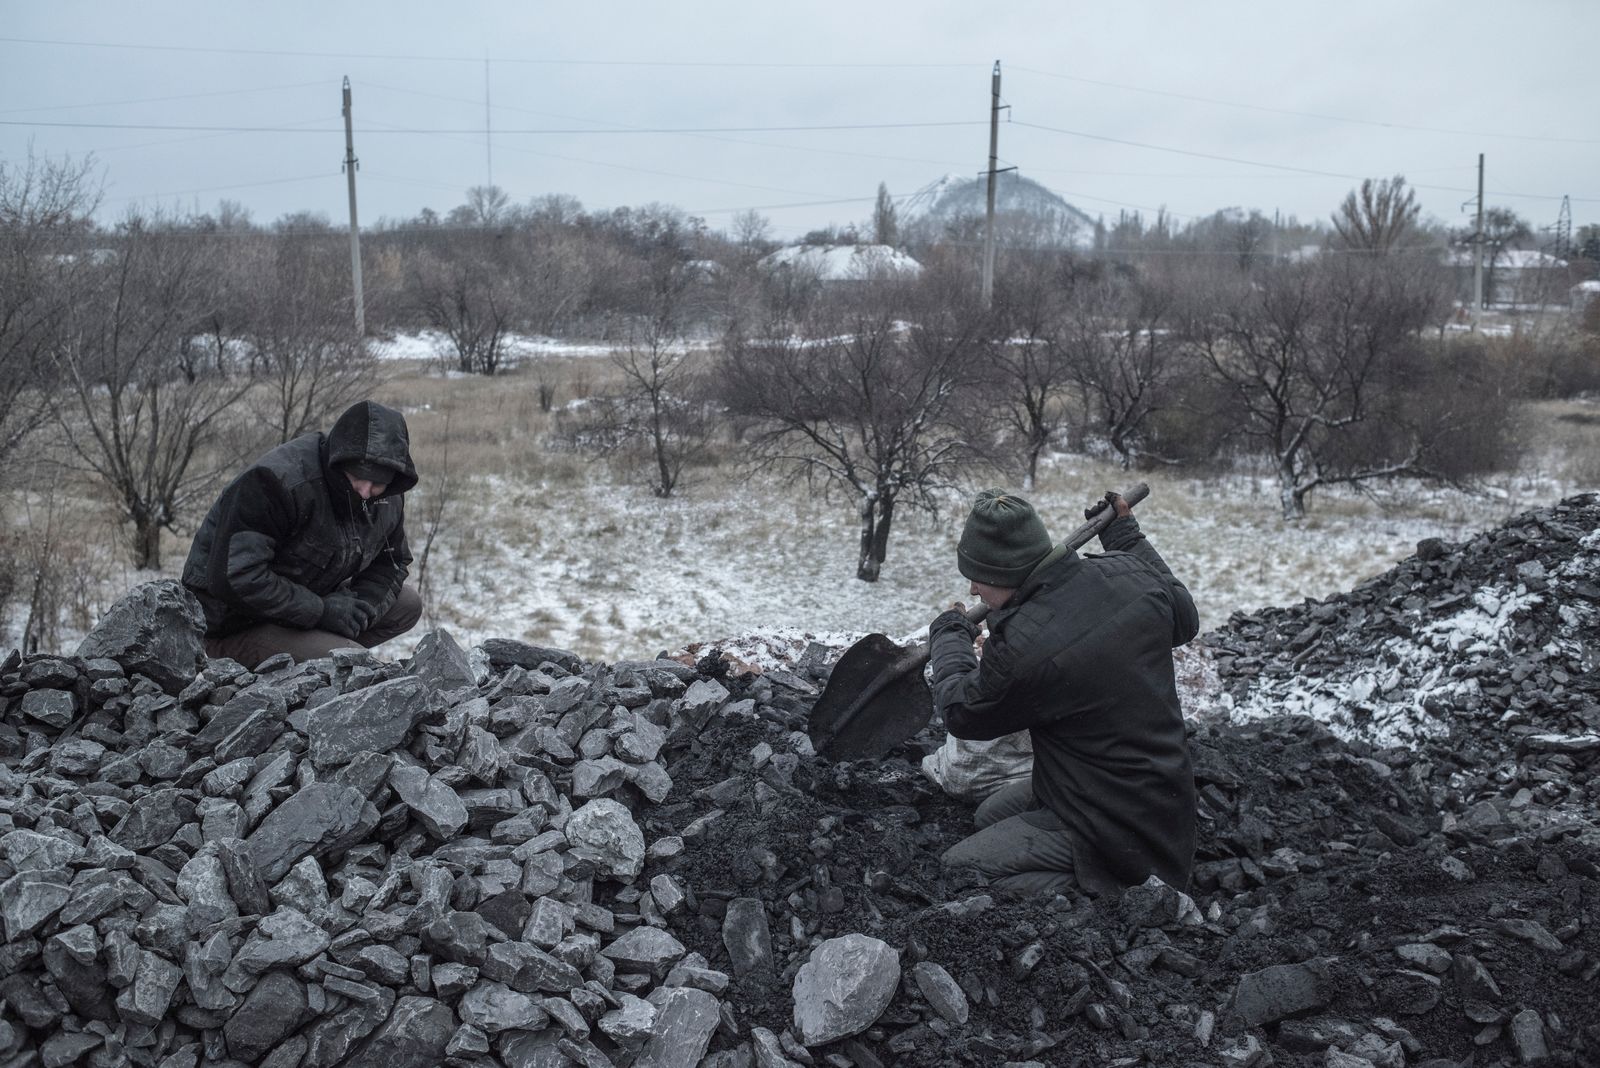 © Valery Melnikov - A local resident collects coal from a mine dump in Donetsk, Ukraine